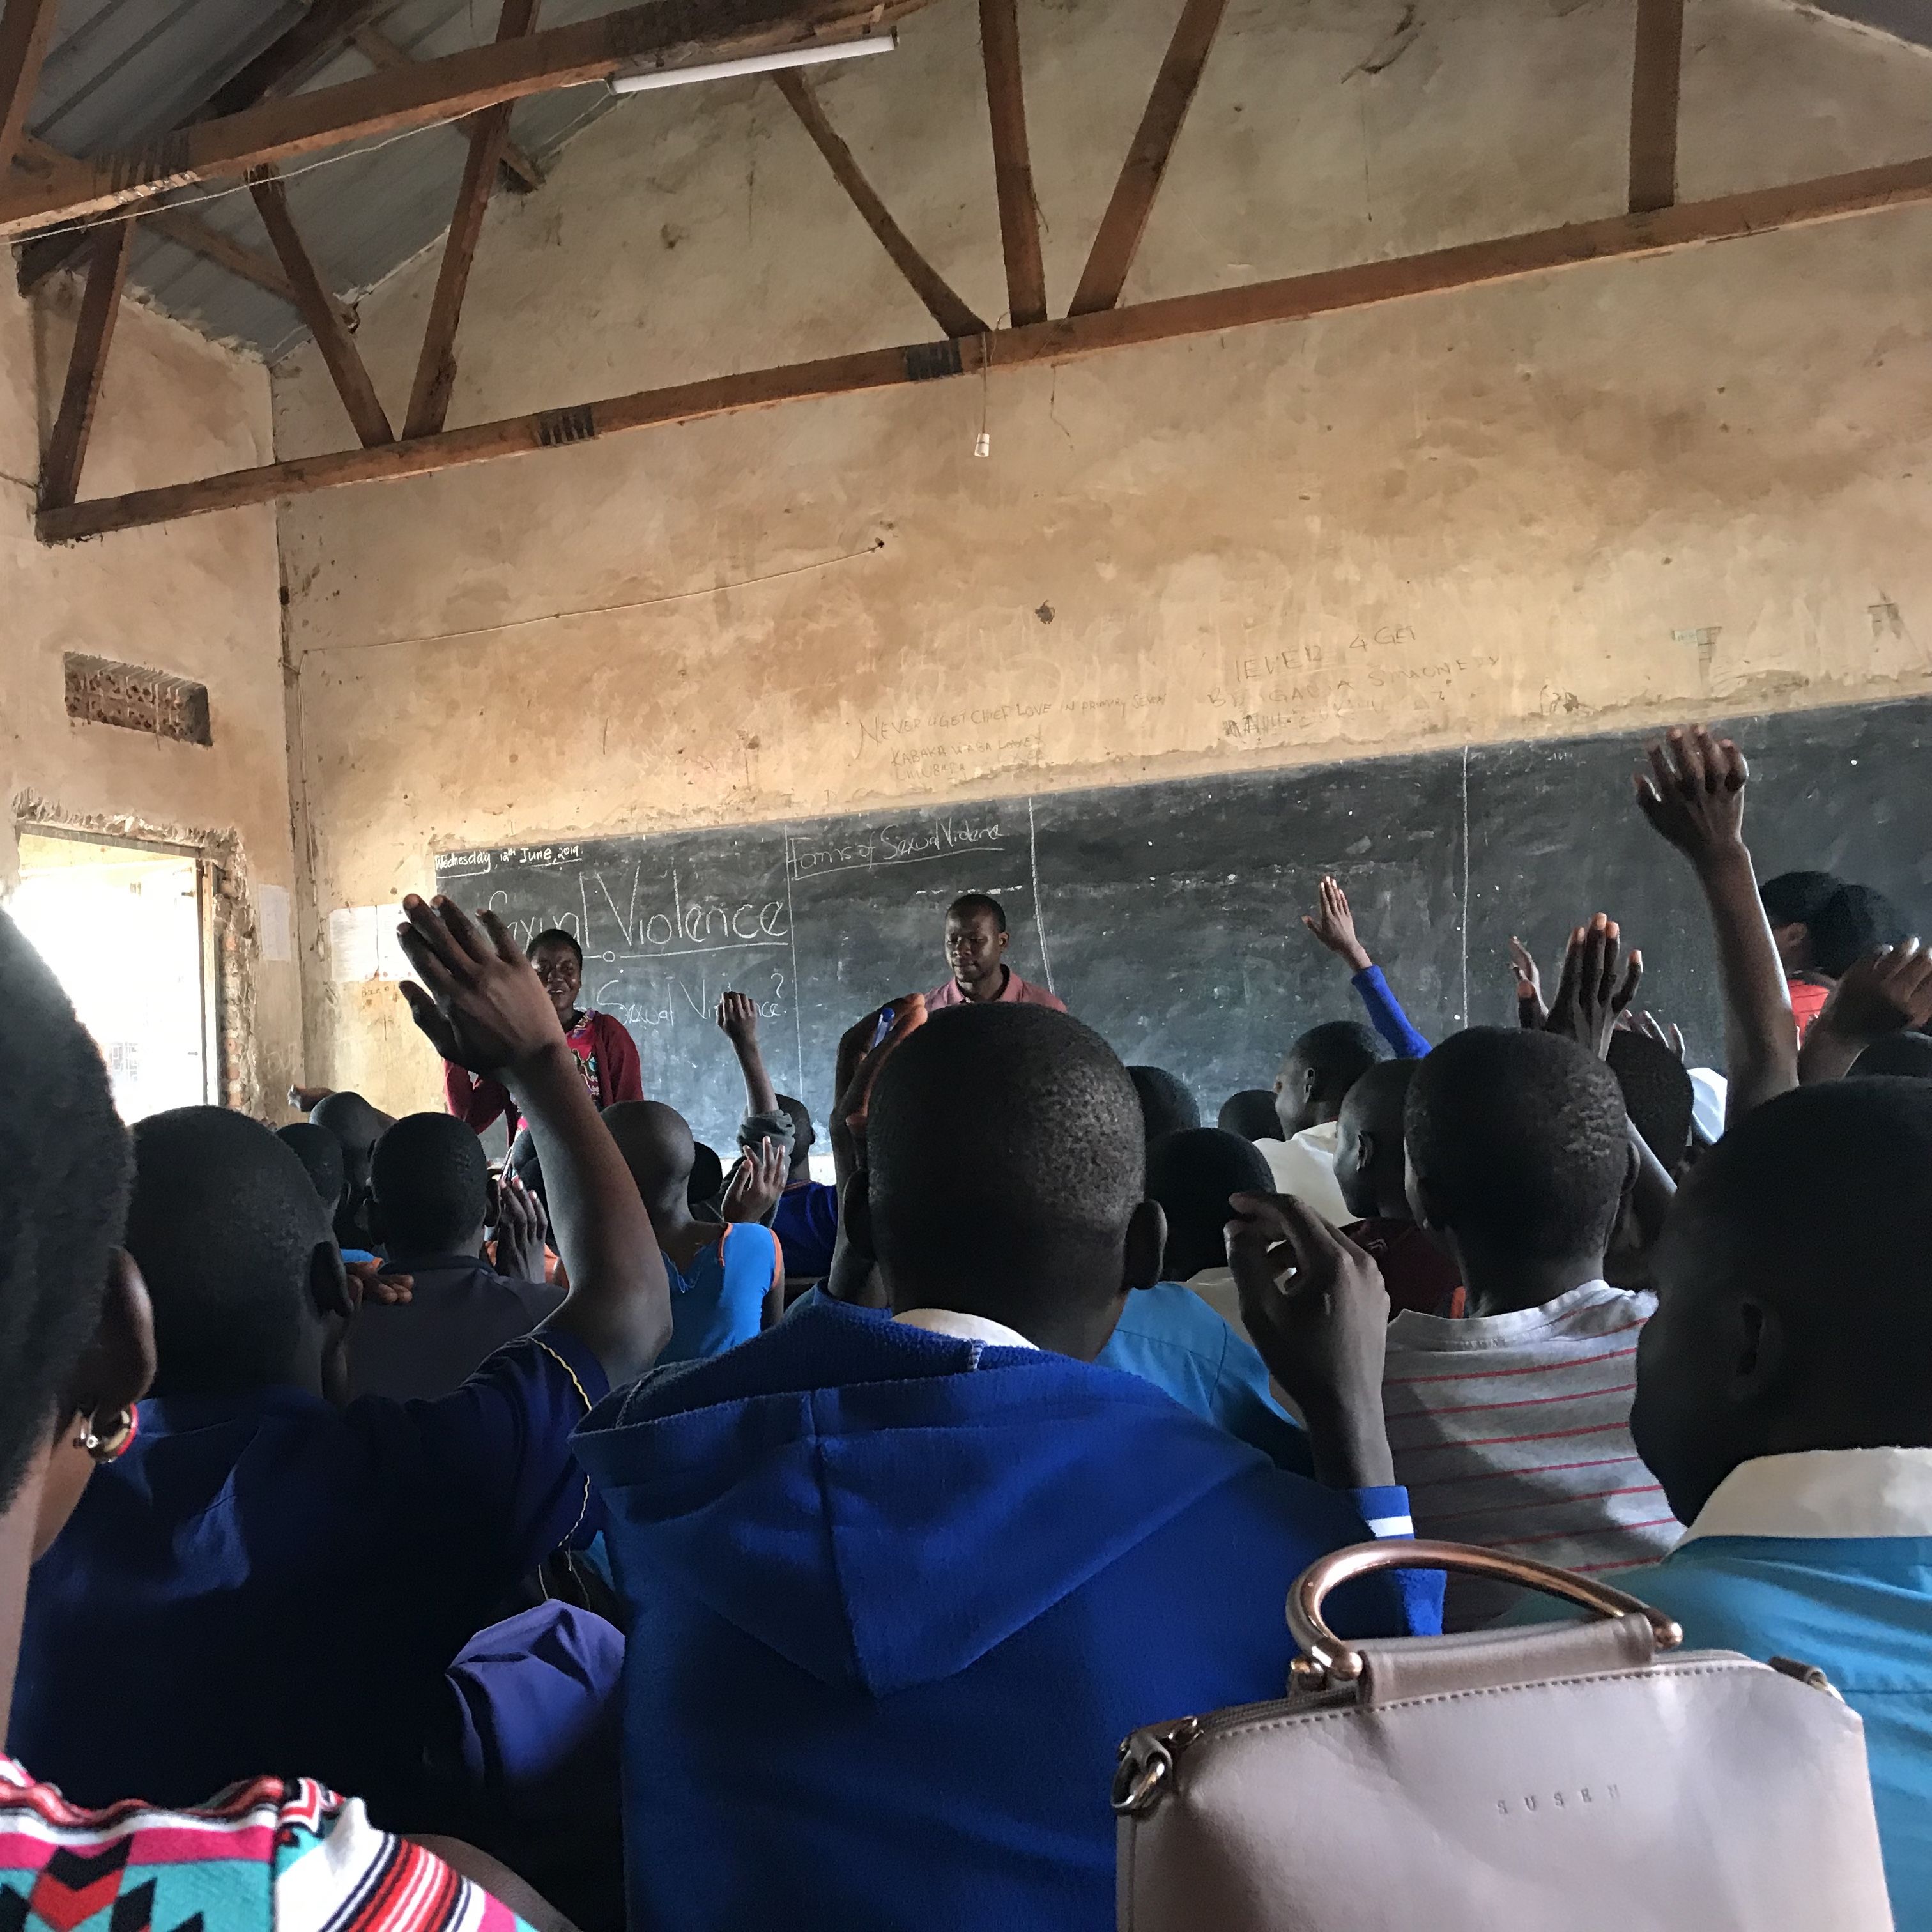 Students at a local elementary school attend an educational session on sexual violence led by members of the GIRLY Network team. Image by Keishi Foecke. Uganda, 2019.